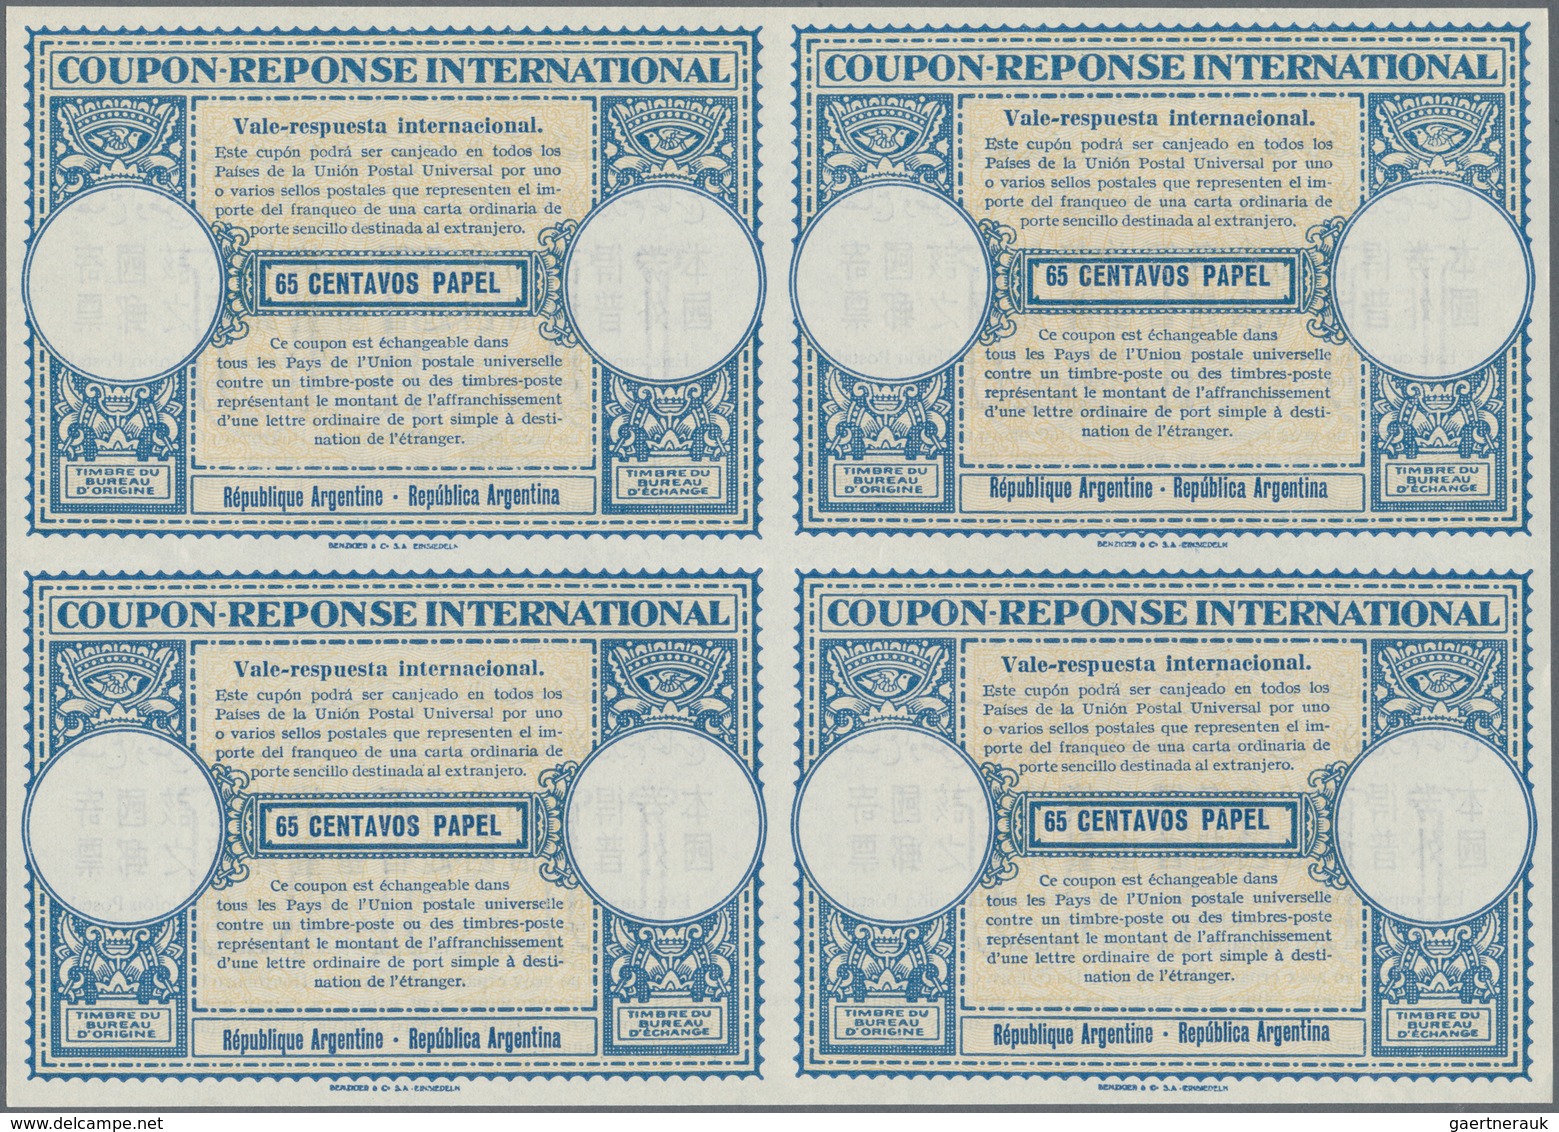 00564 Argentinien - Ganzsachen: 1948/1952. Lot Of 2 Different Intl. Reply Coupons (London Design) Each In - Postal Stationery